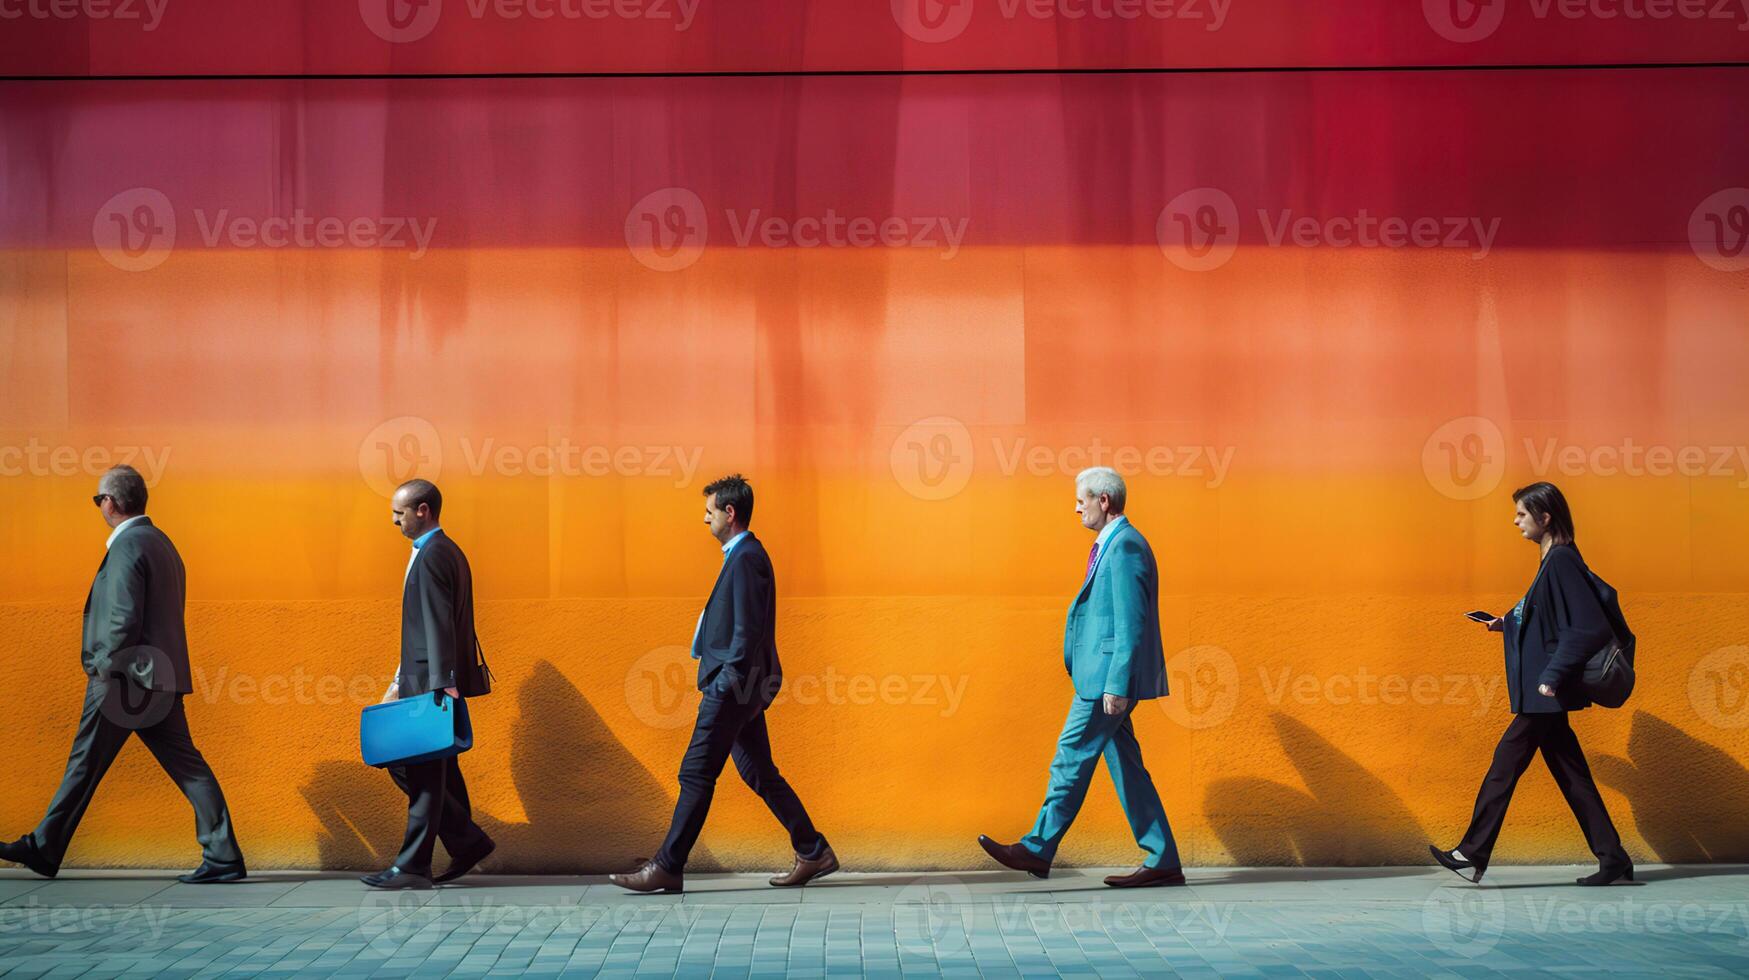 Abstract Image of Business People Walking on the Street to go home, photo